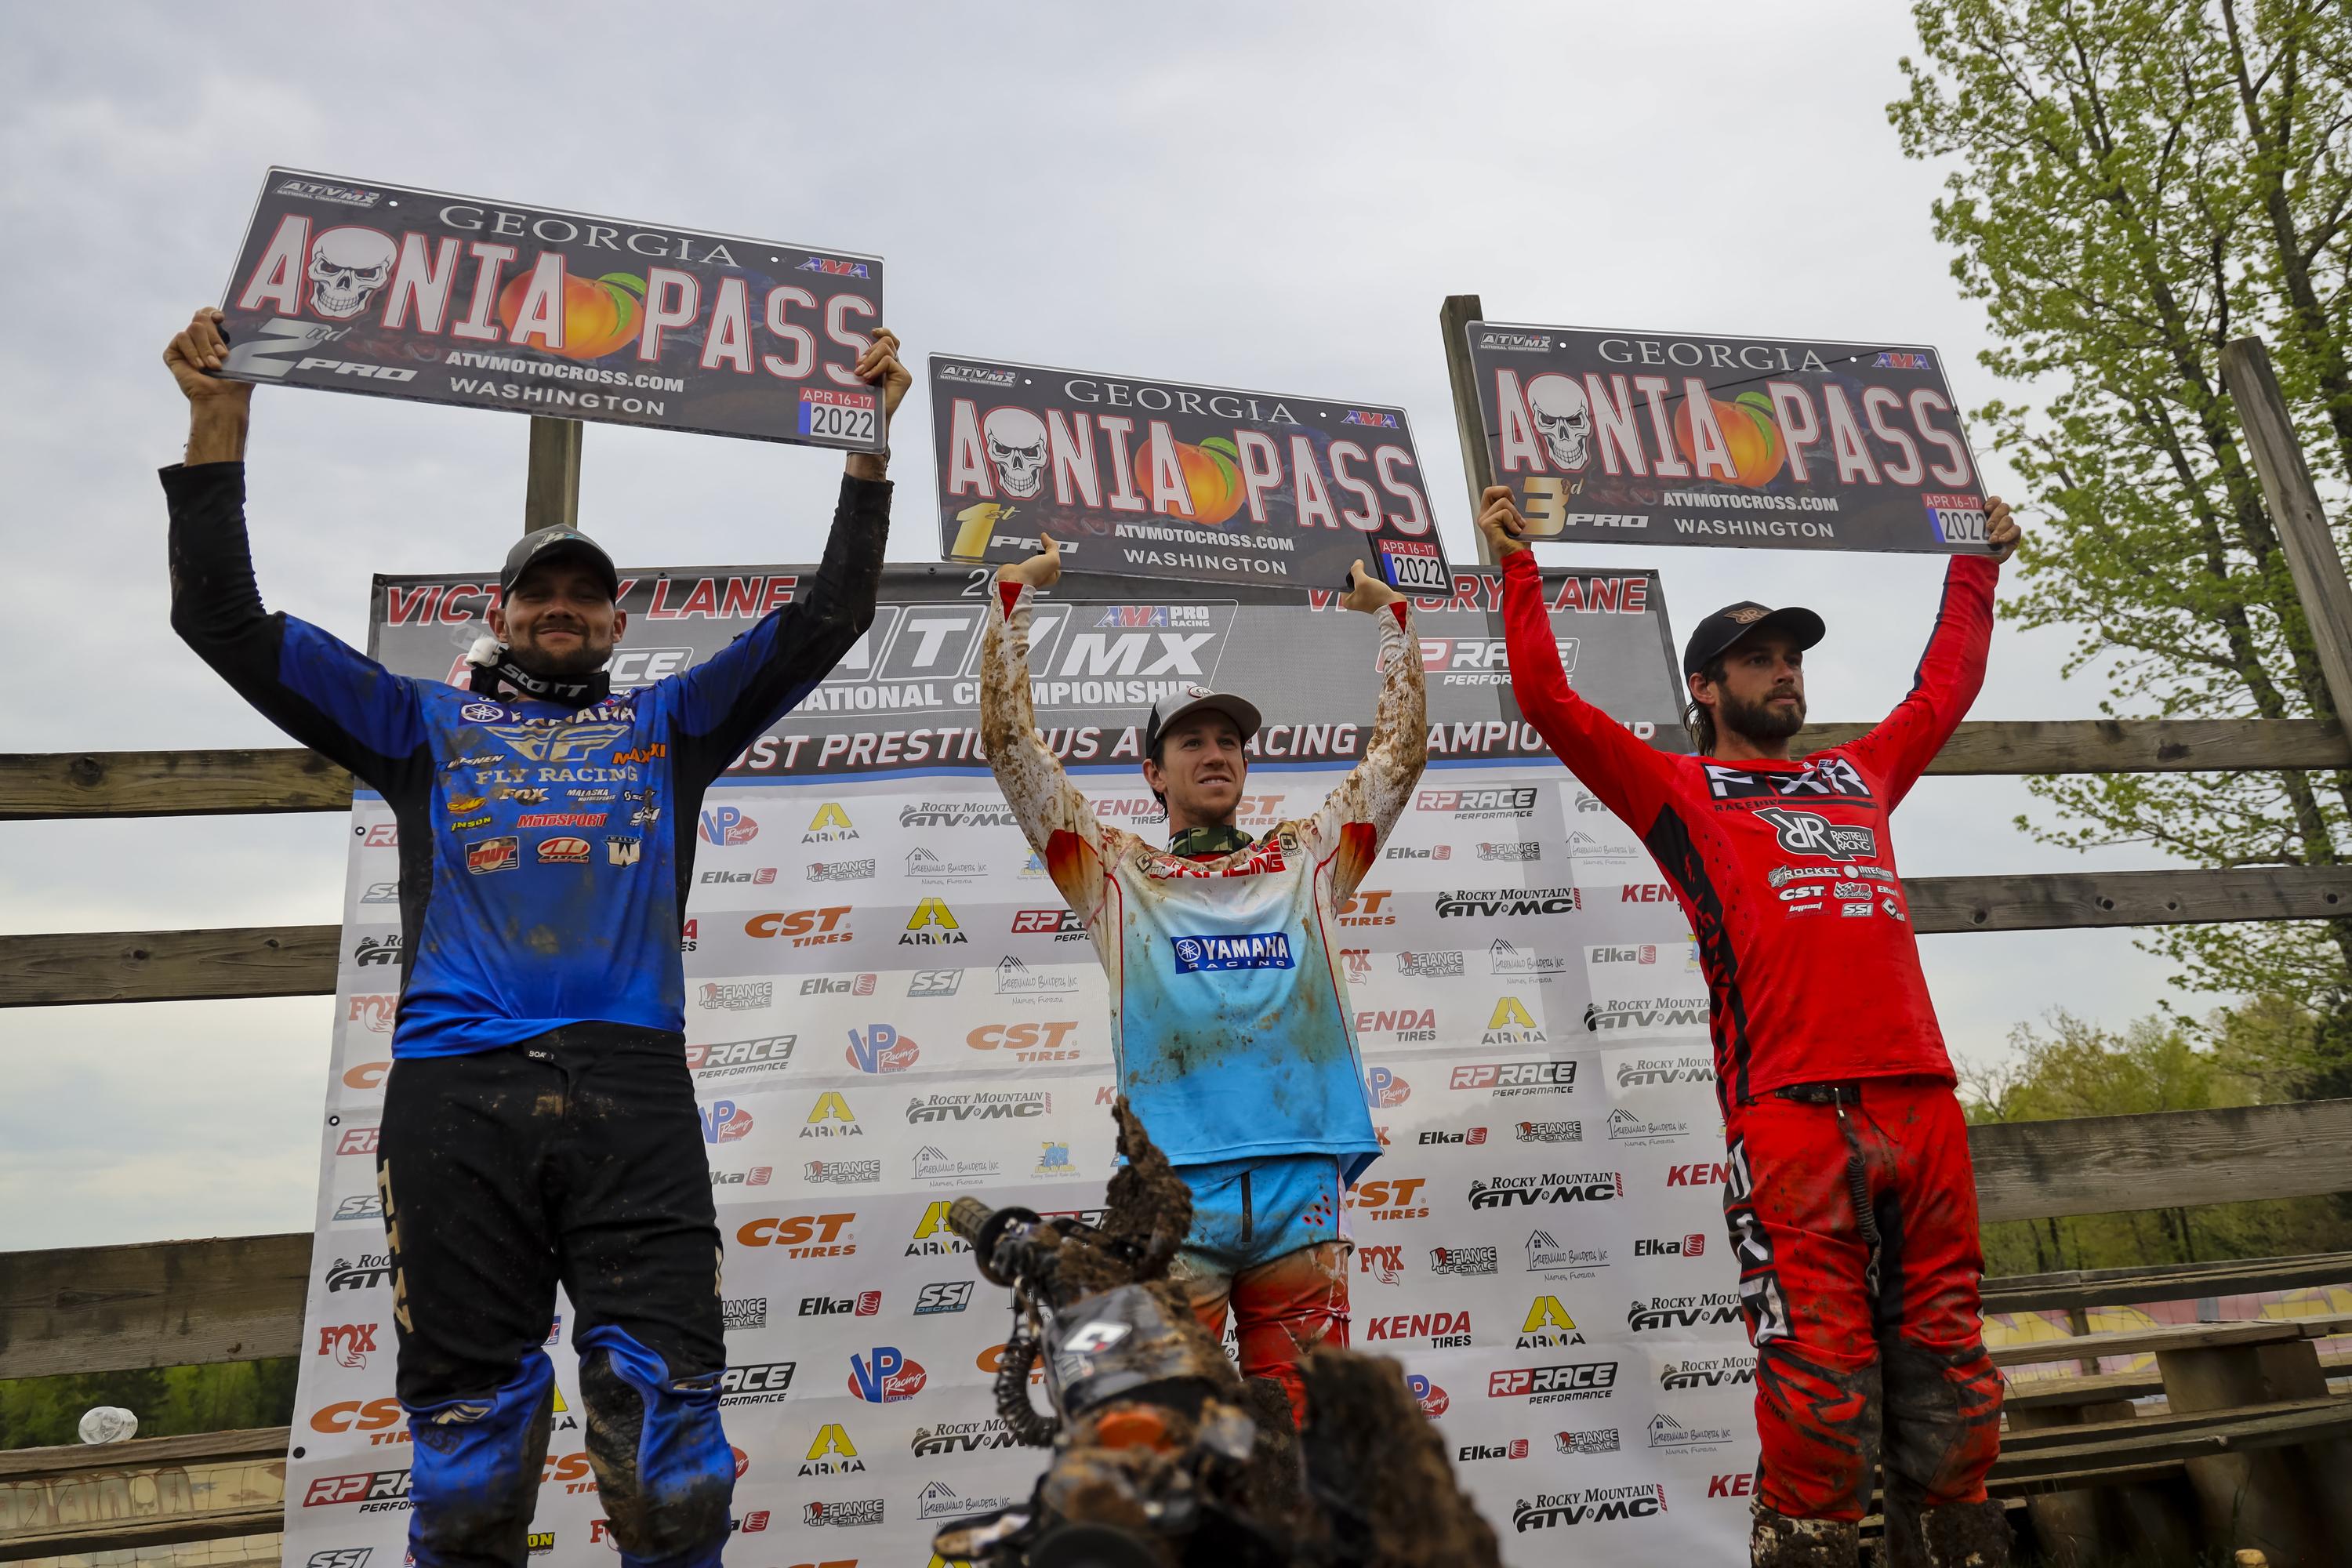 Aonia Pass ATVMX National Championship Race Report